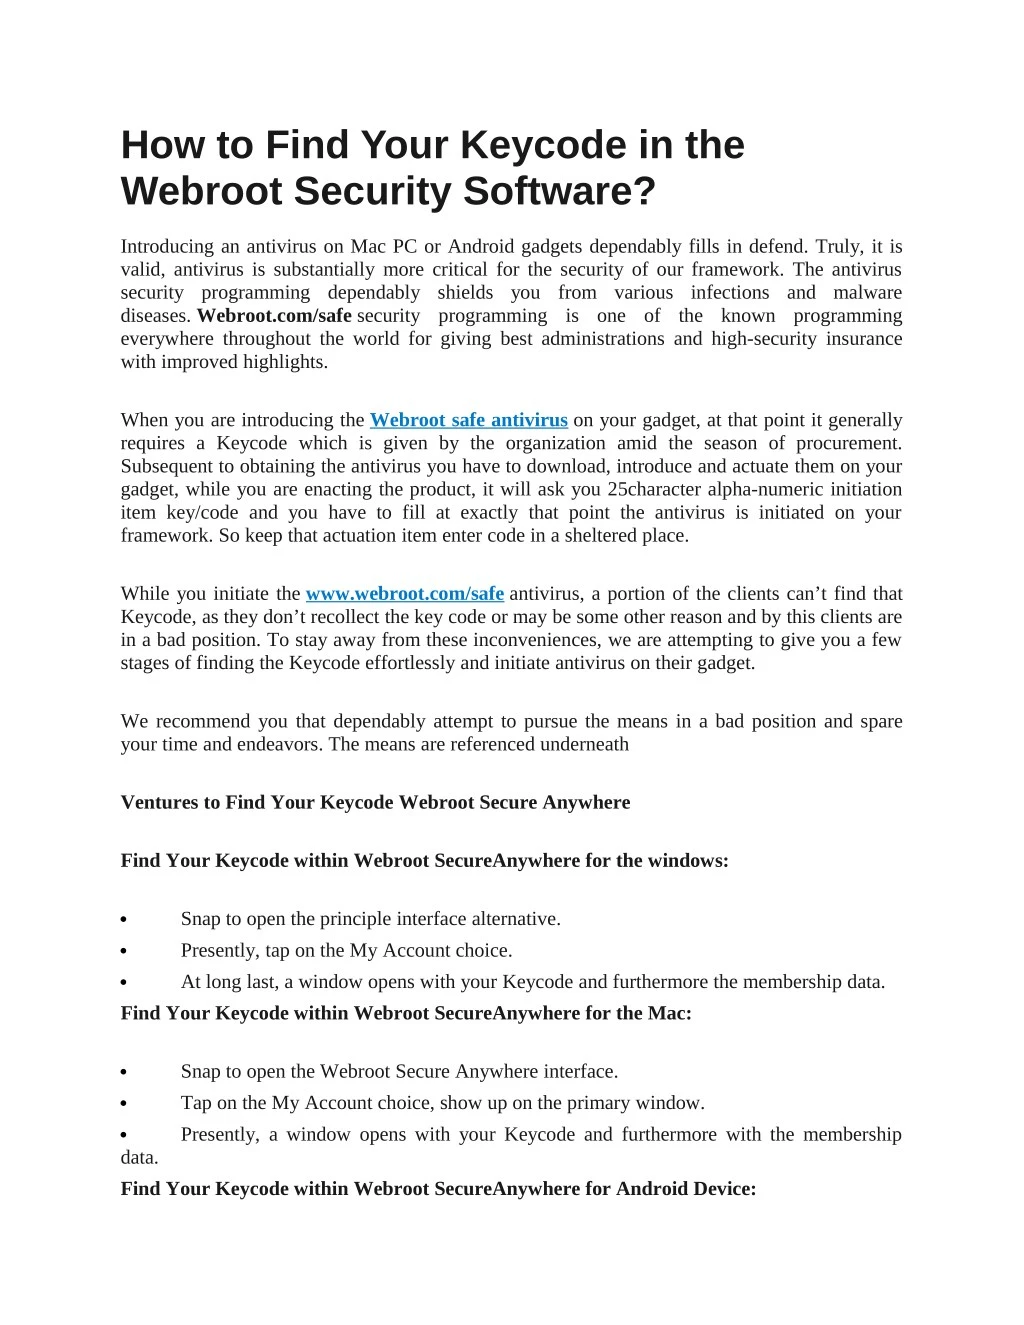 how to find your keycode in the webroot security